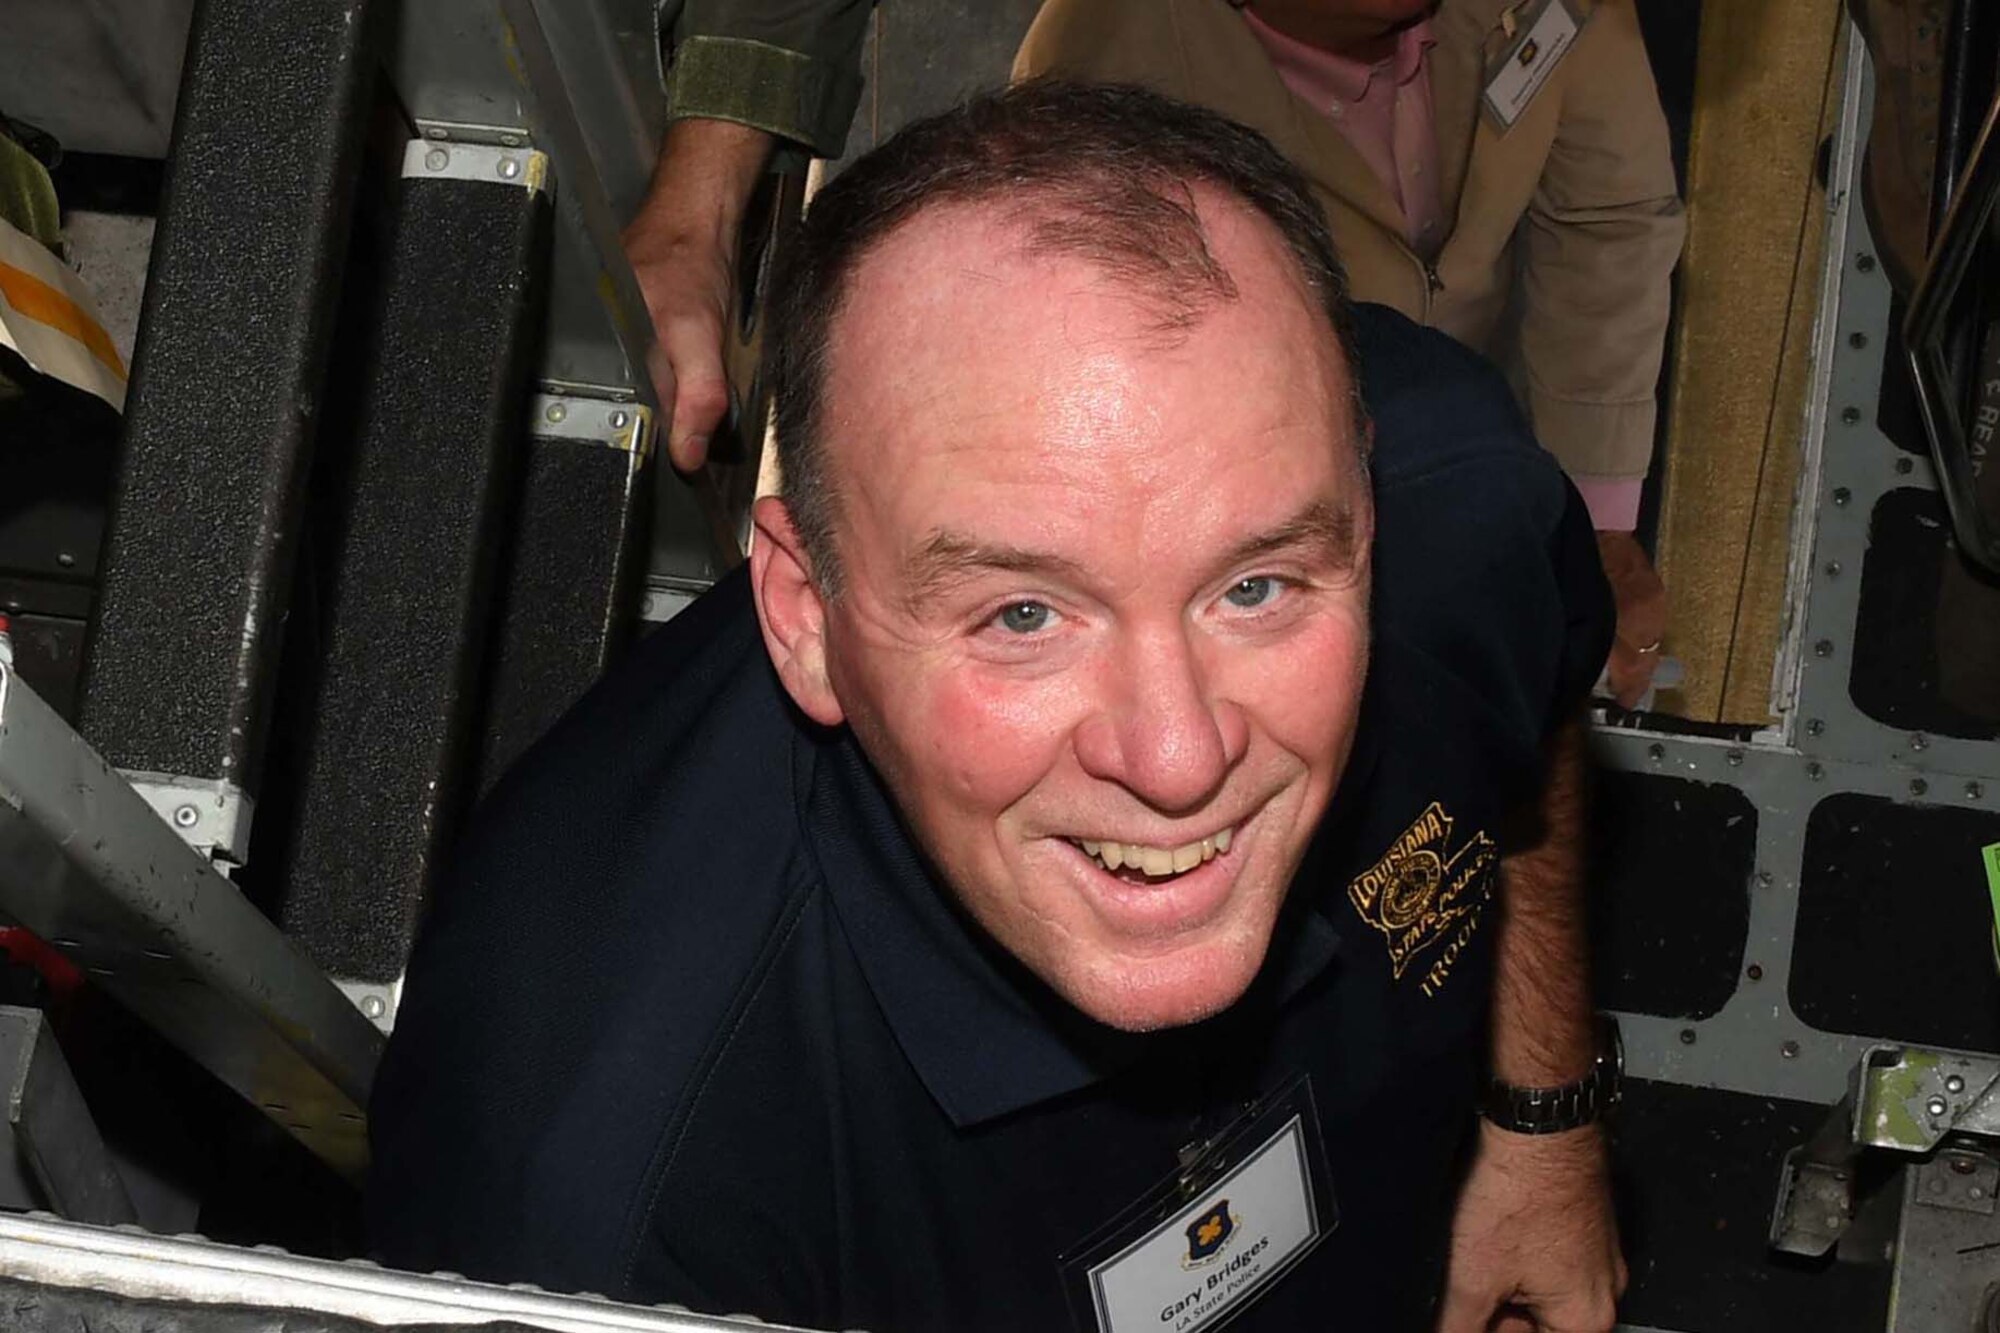 Gary Bridges, of the Louisiana State Police, is all smiles as he climbs into the cockpit of a B-52 Stratofortress at Barksdale Air Force Base, Louisiana, June 2, 2018.  He participated in the 307th Bomb Wing’s Employer Appreciation Day which included a static tour of a B-52 and an air refueling flight aboard a KC-135 Stratotanker. (U.S. Air Force photo by Staff Sgt. Callie Ware/released)